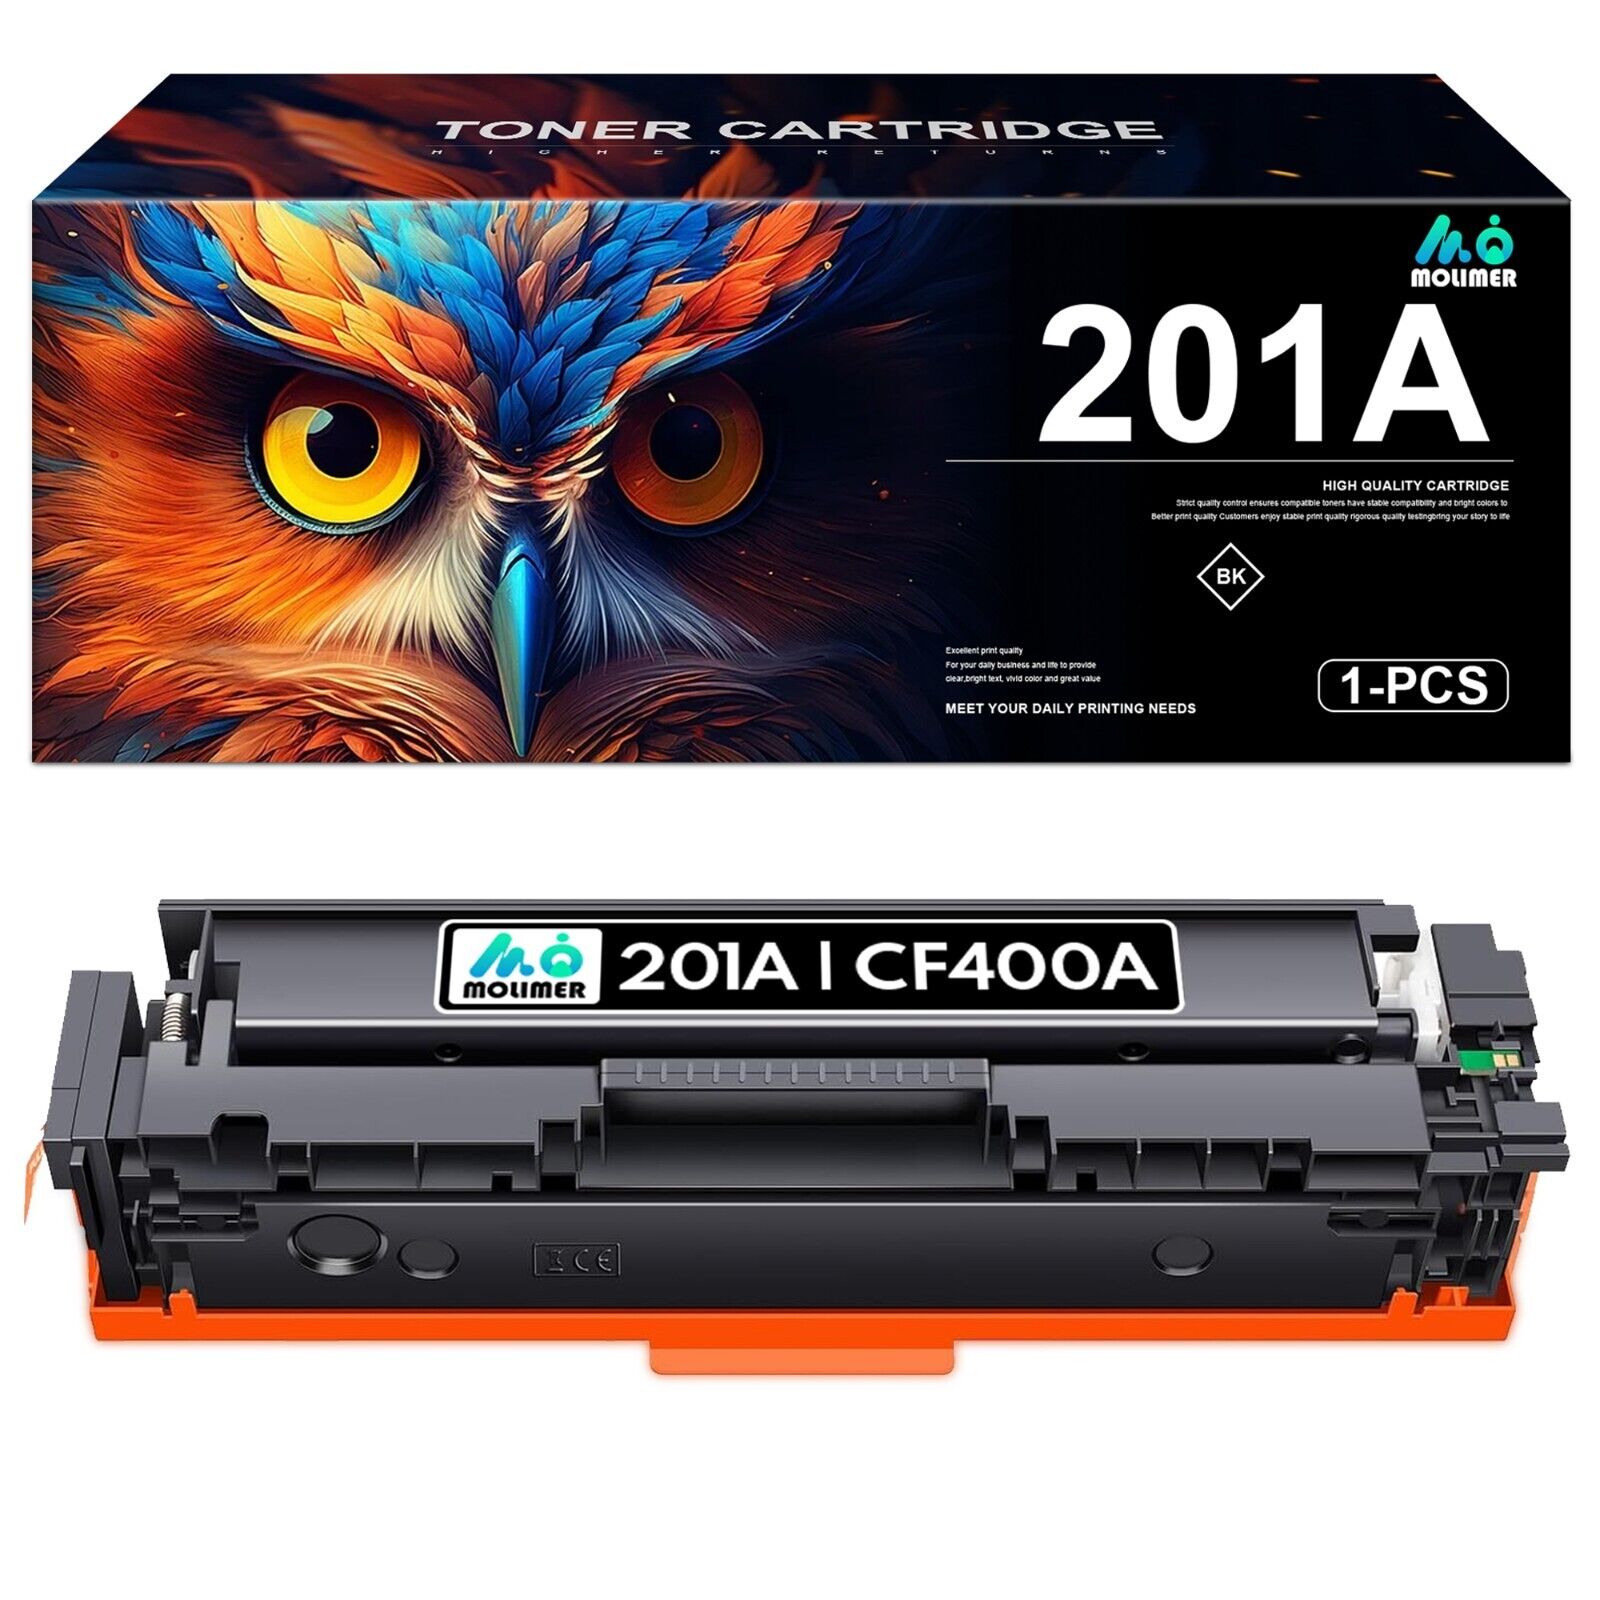 201A | CF400A Toner Cartridge High Yield Replacement for HP 1012 M1005 M1319f